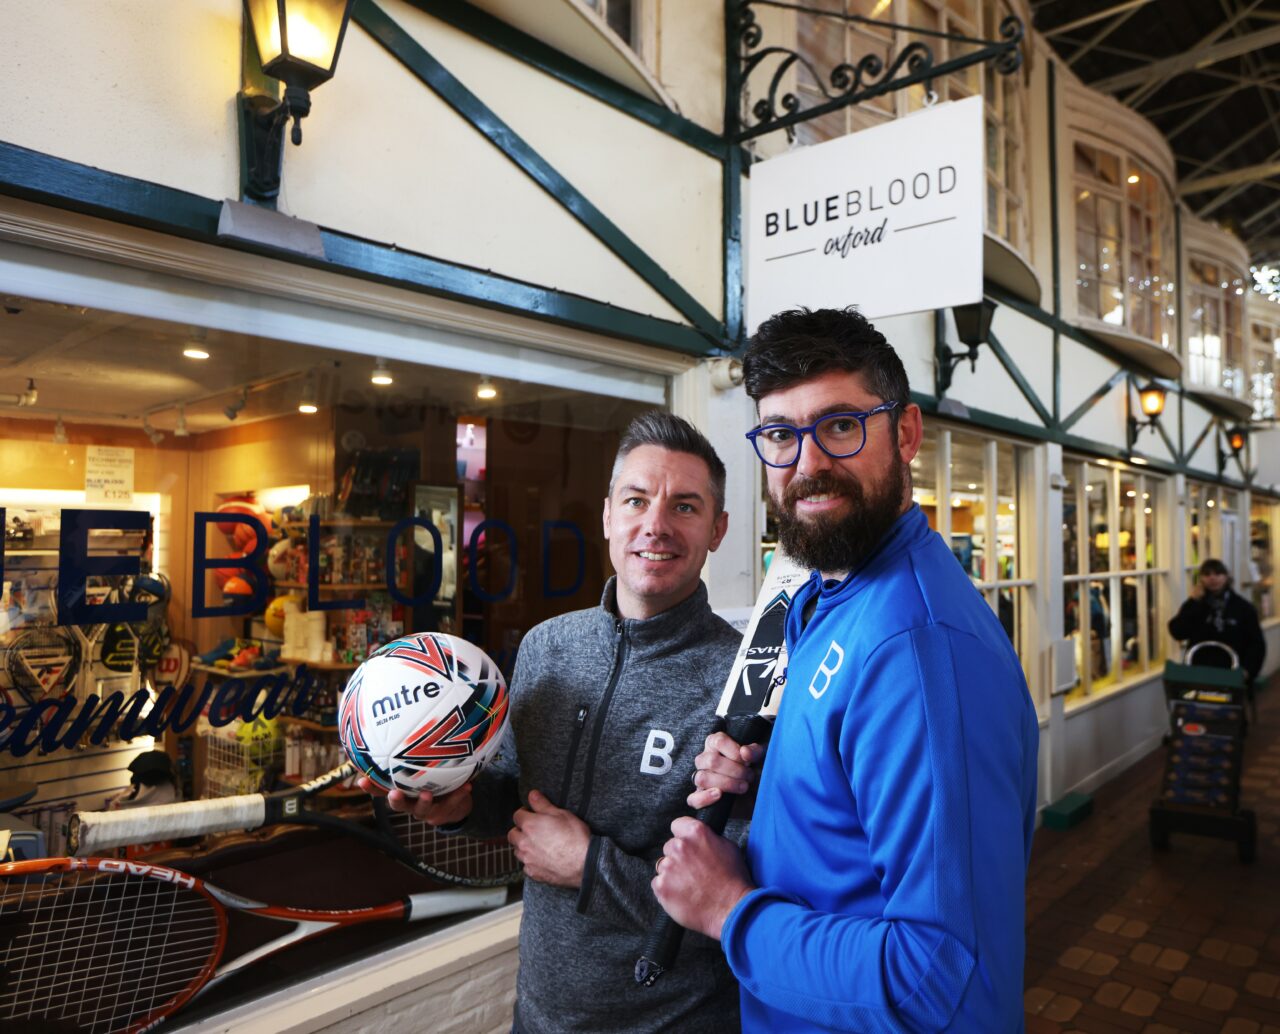 Blueblood shop front with Ben and Dale